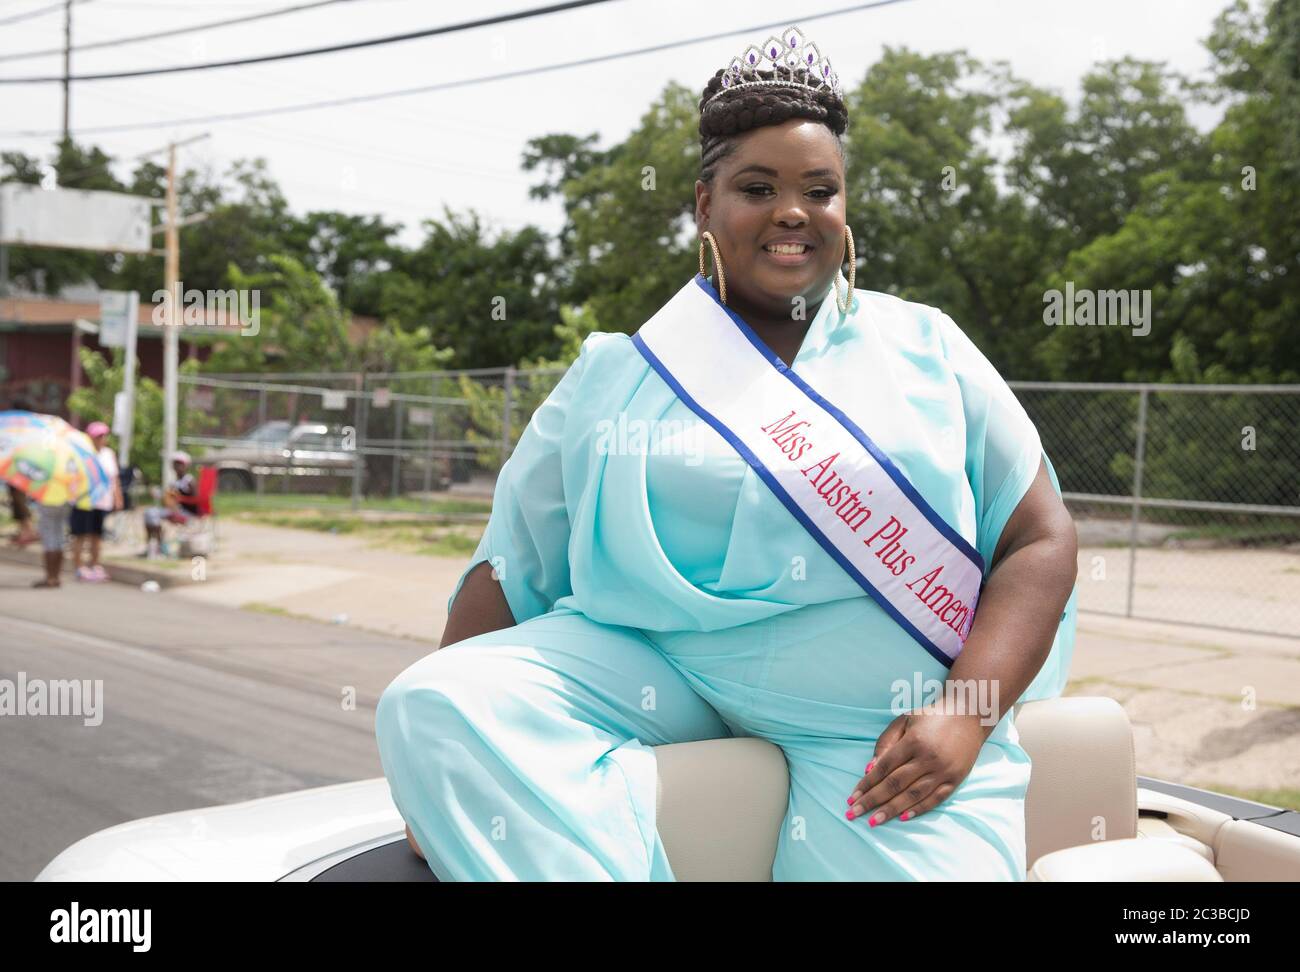 Juneteenth parade--Austin, Texas USA, June 21 2014: Young Black woman crowned Miss Austin Plus America rides in convertible  car as annual Juneteenth parade proceeds through East Austin as part of a day-long celebration. Juneteenth, also known as 'Freedom Day' or 'Emancipation Day,' celebrates the end of slavery in the United States at the end of the Civil War, or War Between the States. ©Marjorie Kamys Cotera/Daemmrich Photography Stock Photo